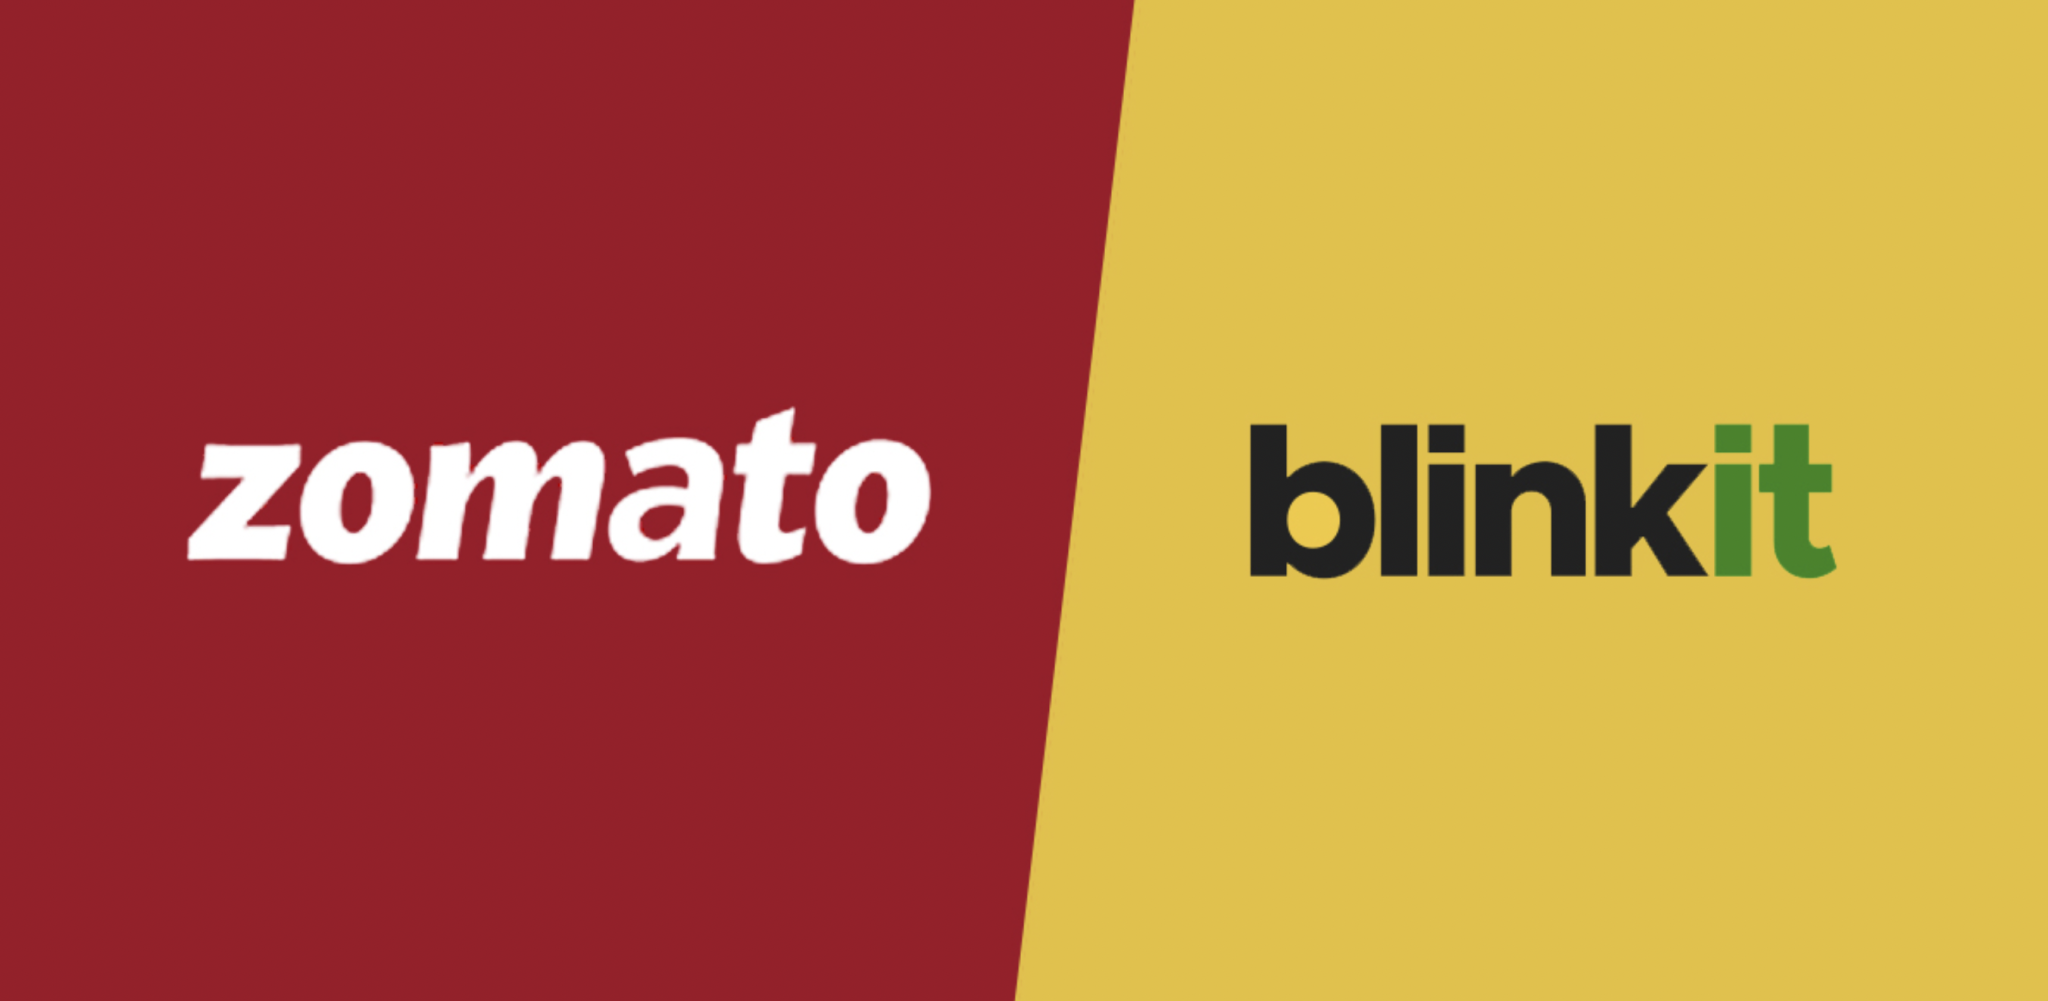 Zomato will now deliver grocery via Blinkit as a part of its pilot test